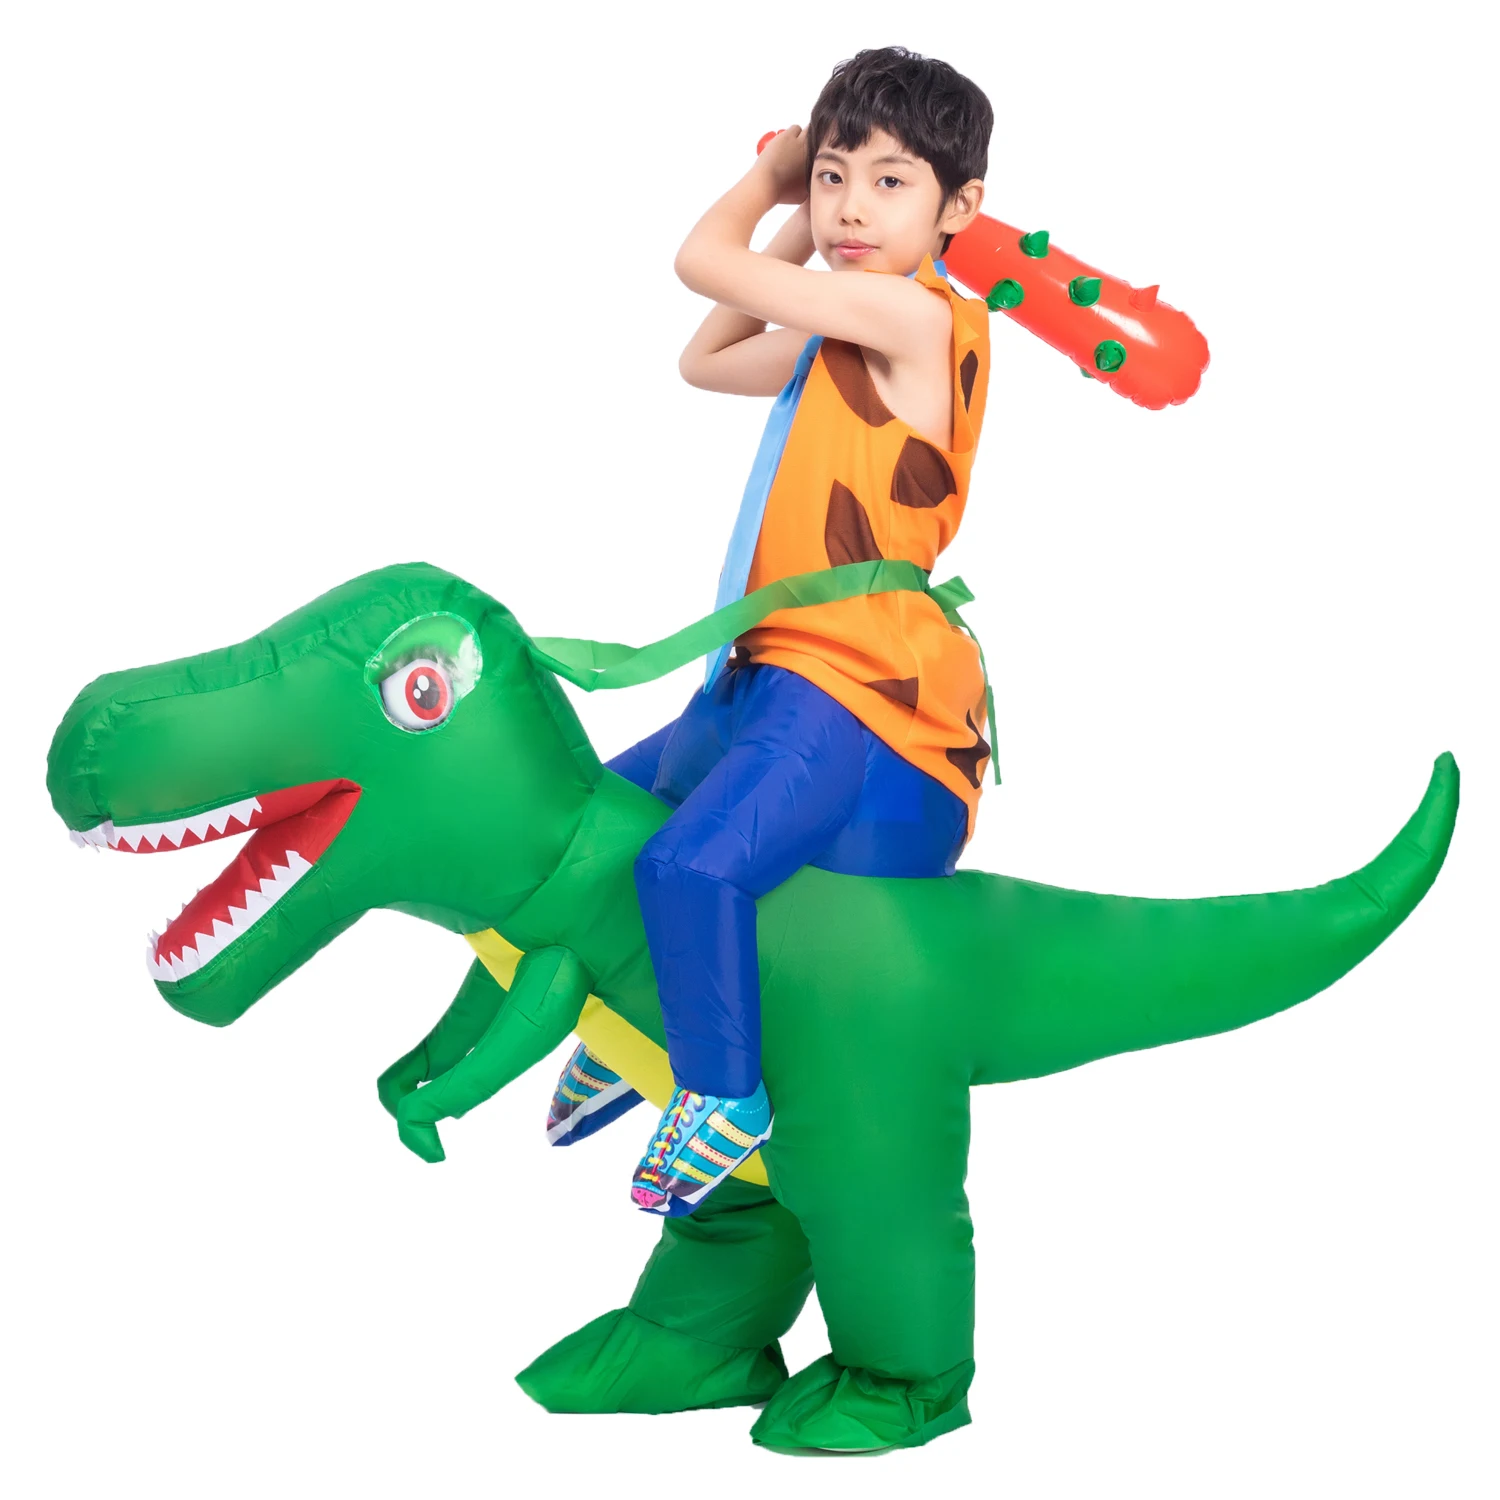 Boys Caveman Fred Riding Dinosaur Inflatable Costume Child Kids Halloween Purim Party Inflated Fancy Dress Cosplay